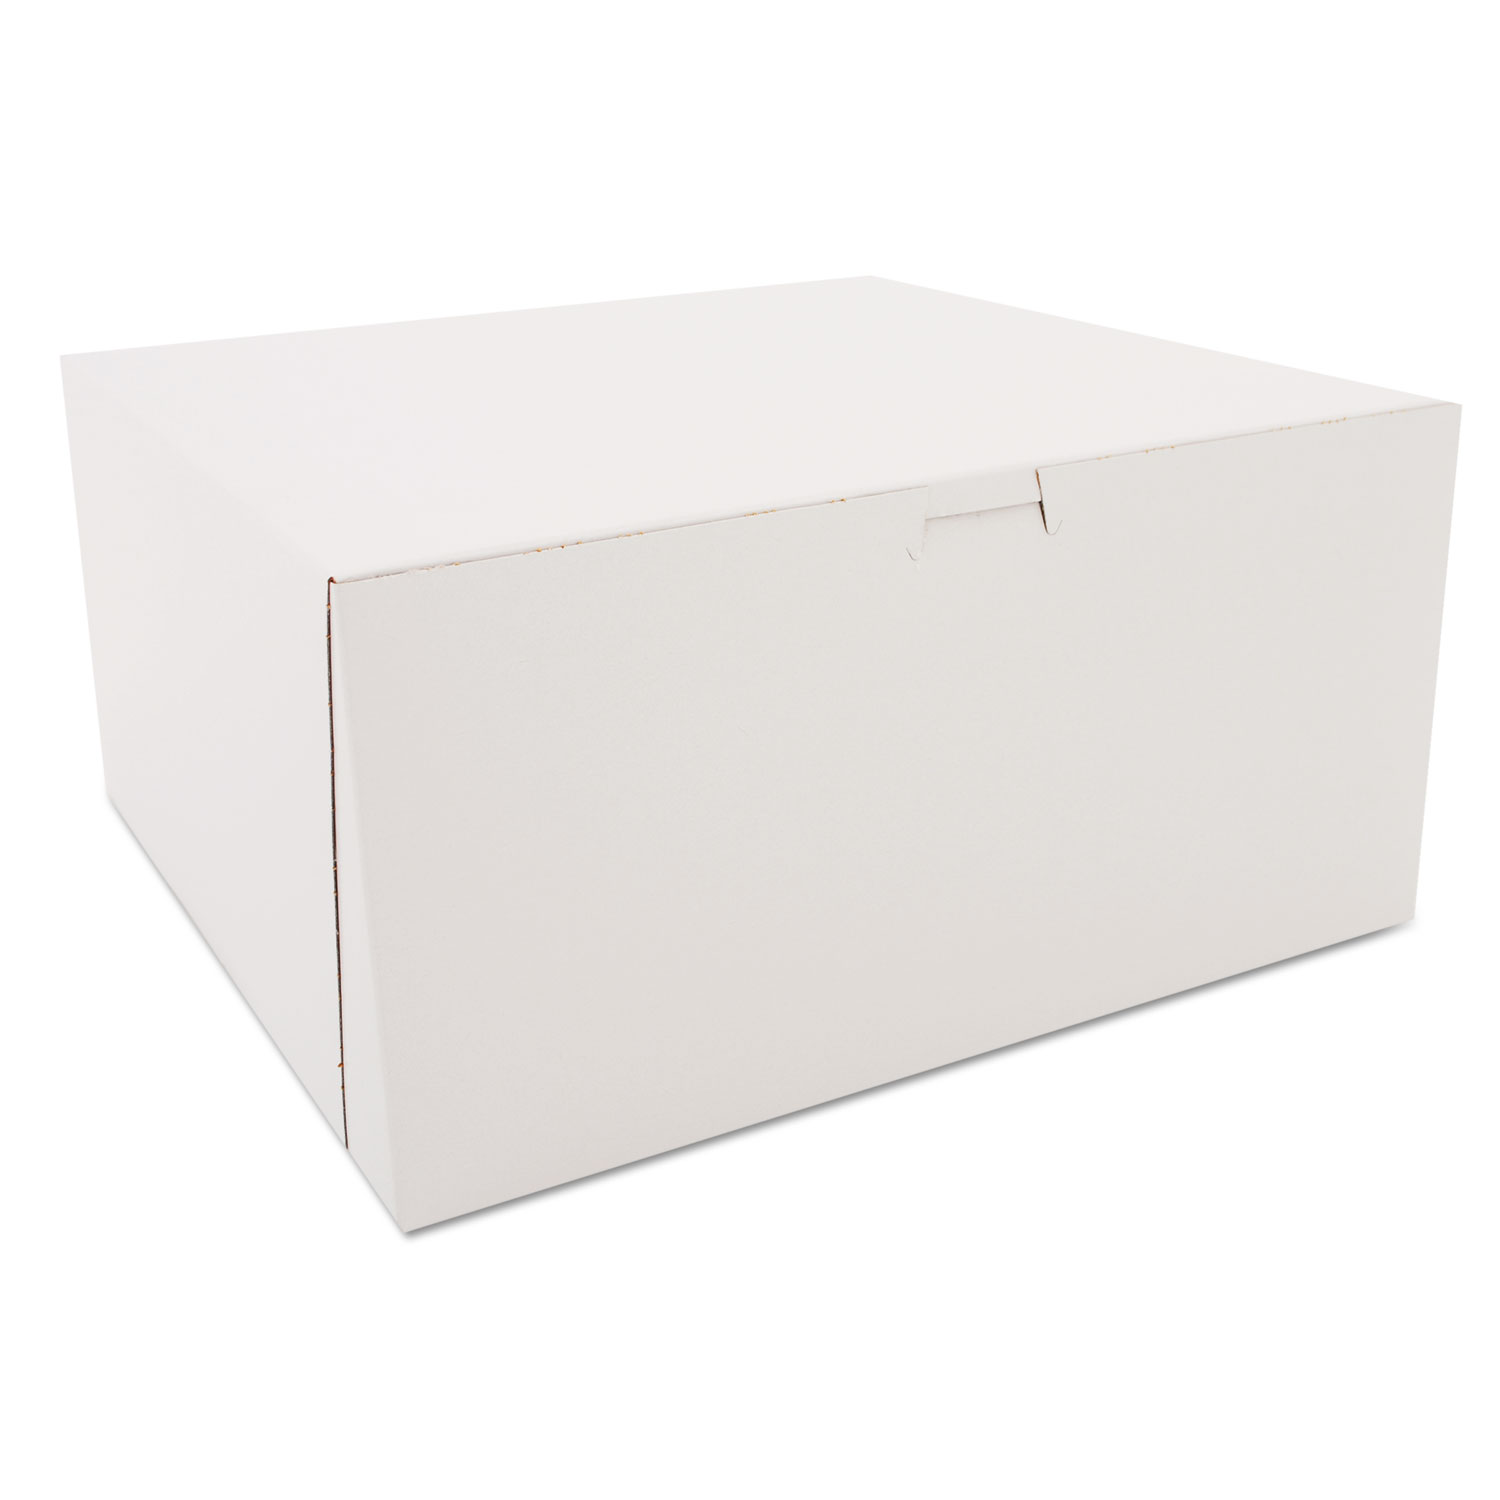  SCT SCH 0989 Tuck-Top Bakery Boxes, White, Paperboard, 12 x 12 x 6 (SCH0989) 